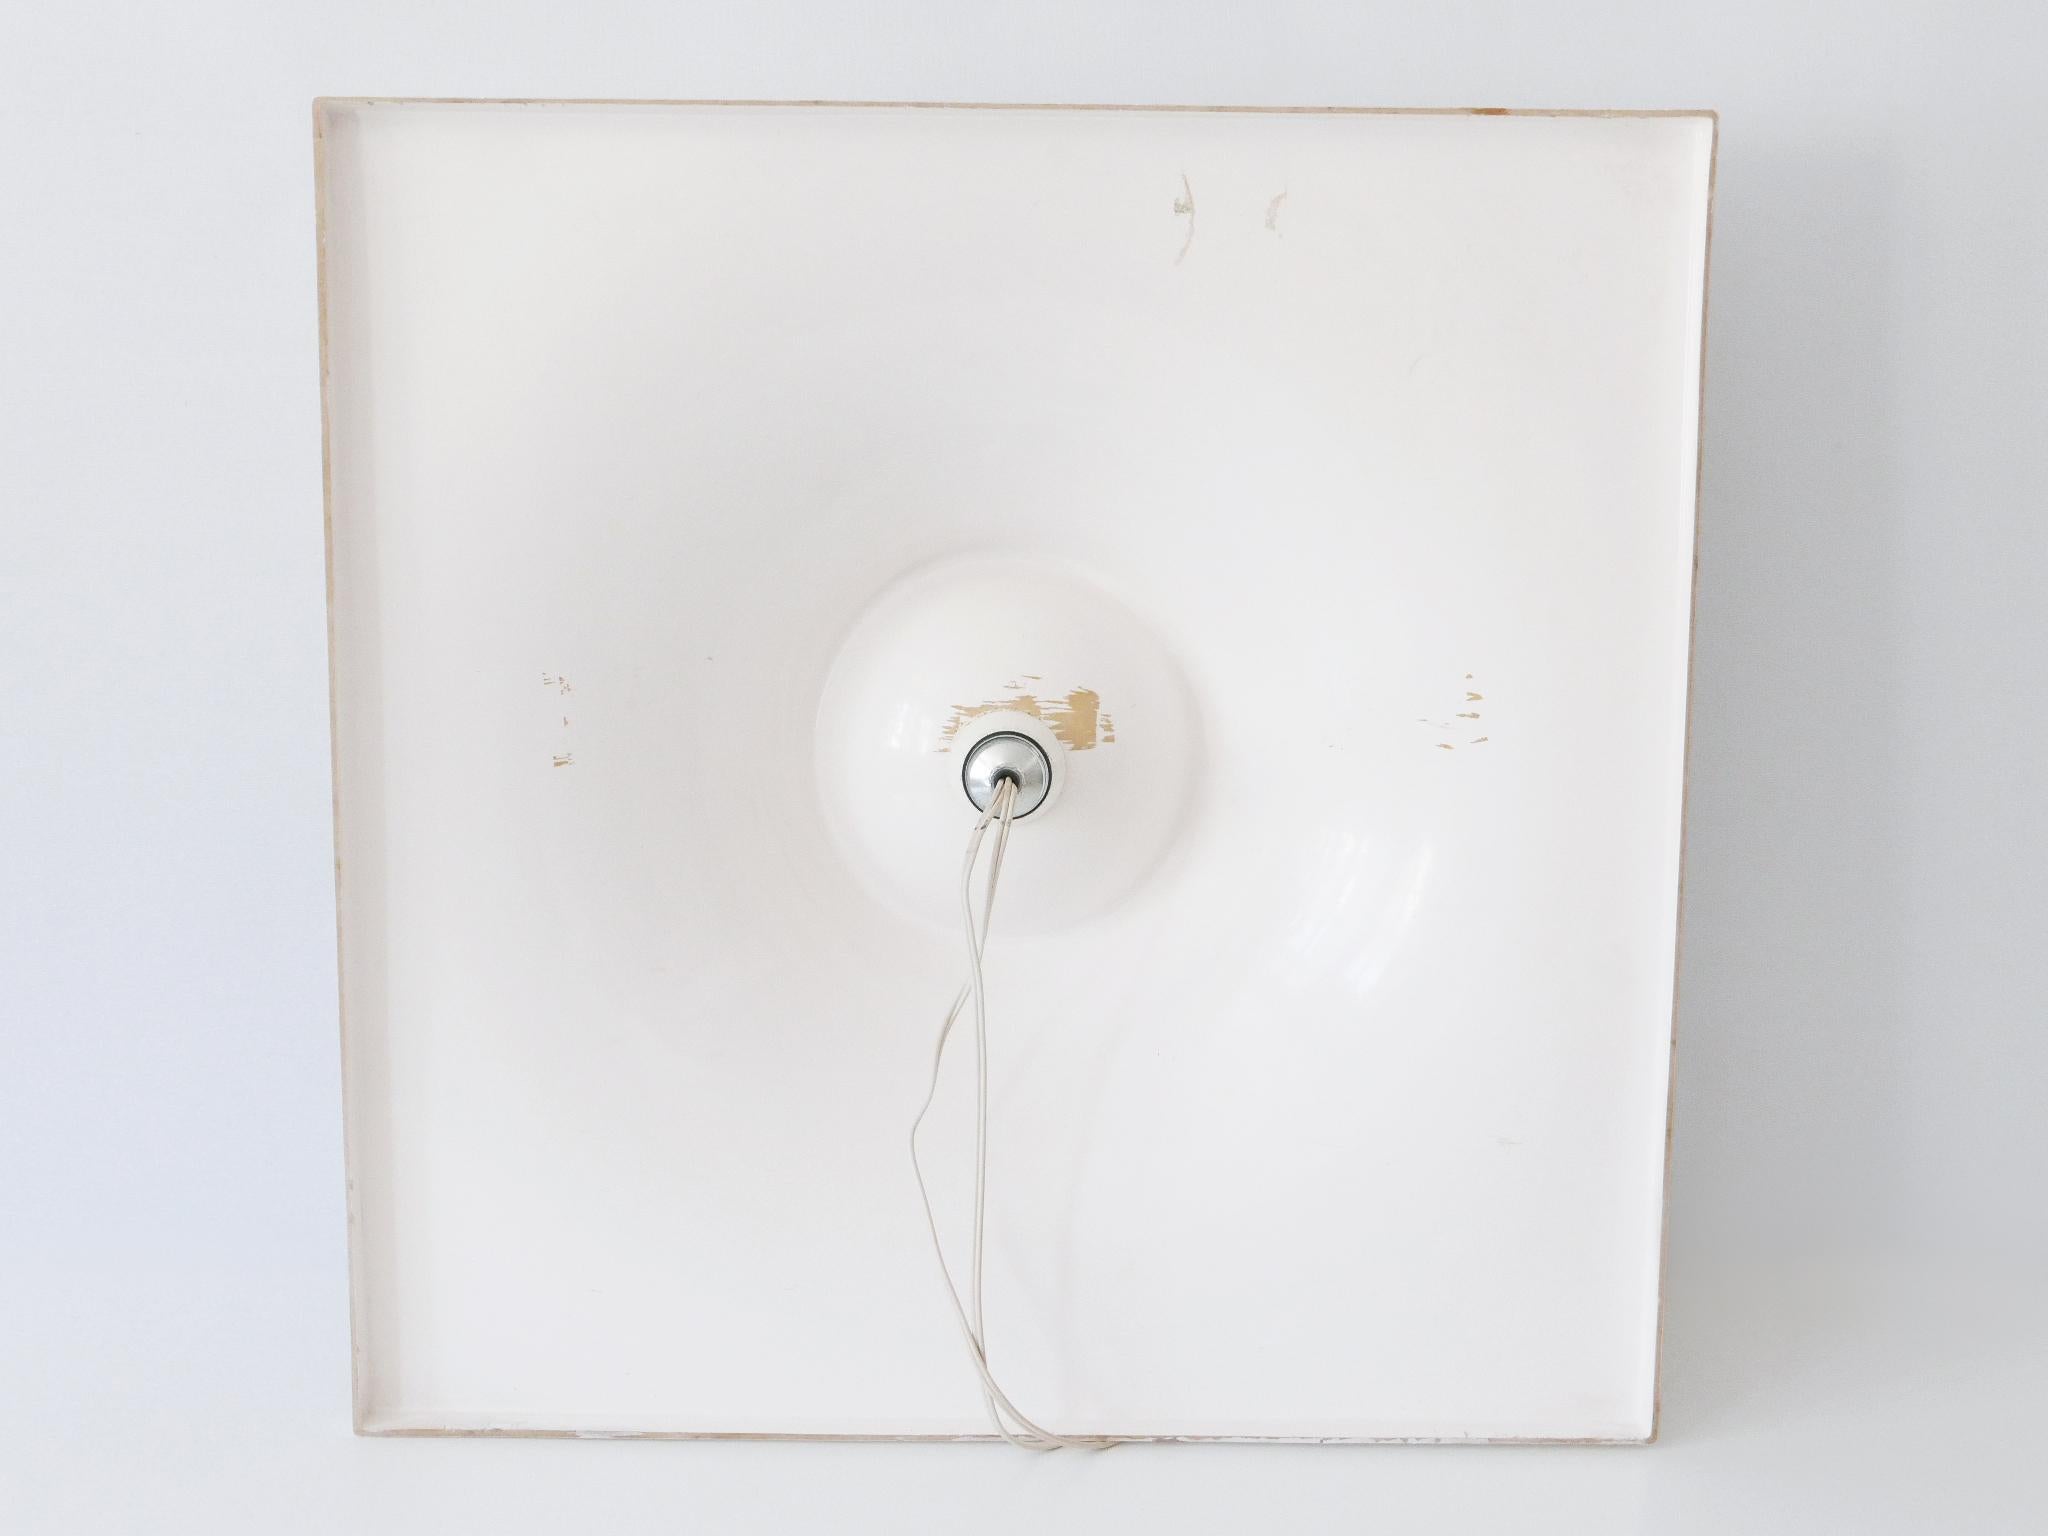 Set of Three Large Mid-Century Modern Fiberglass Sconces or Wall Lamps 1970s For Sale 9